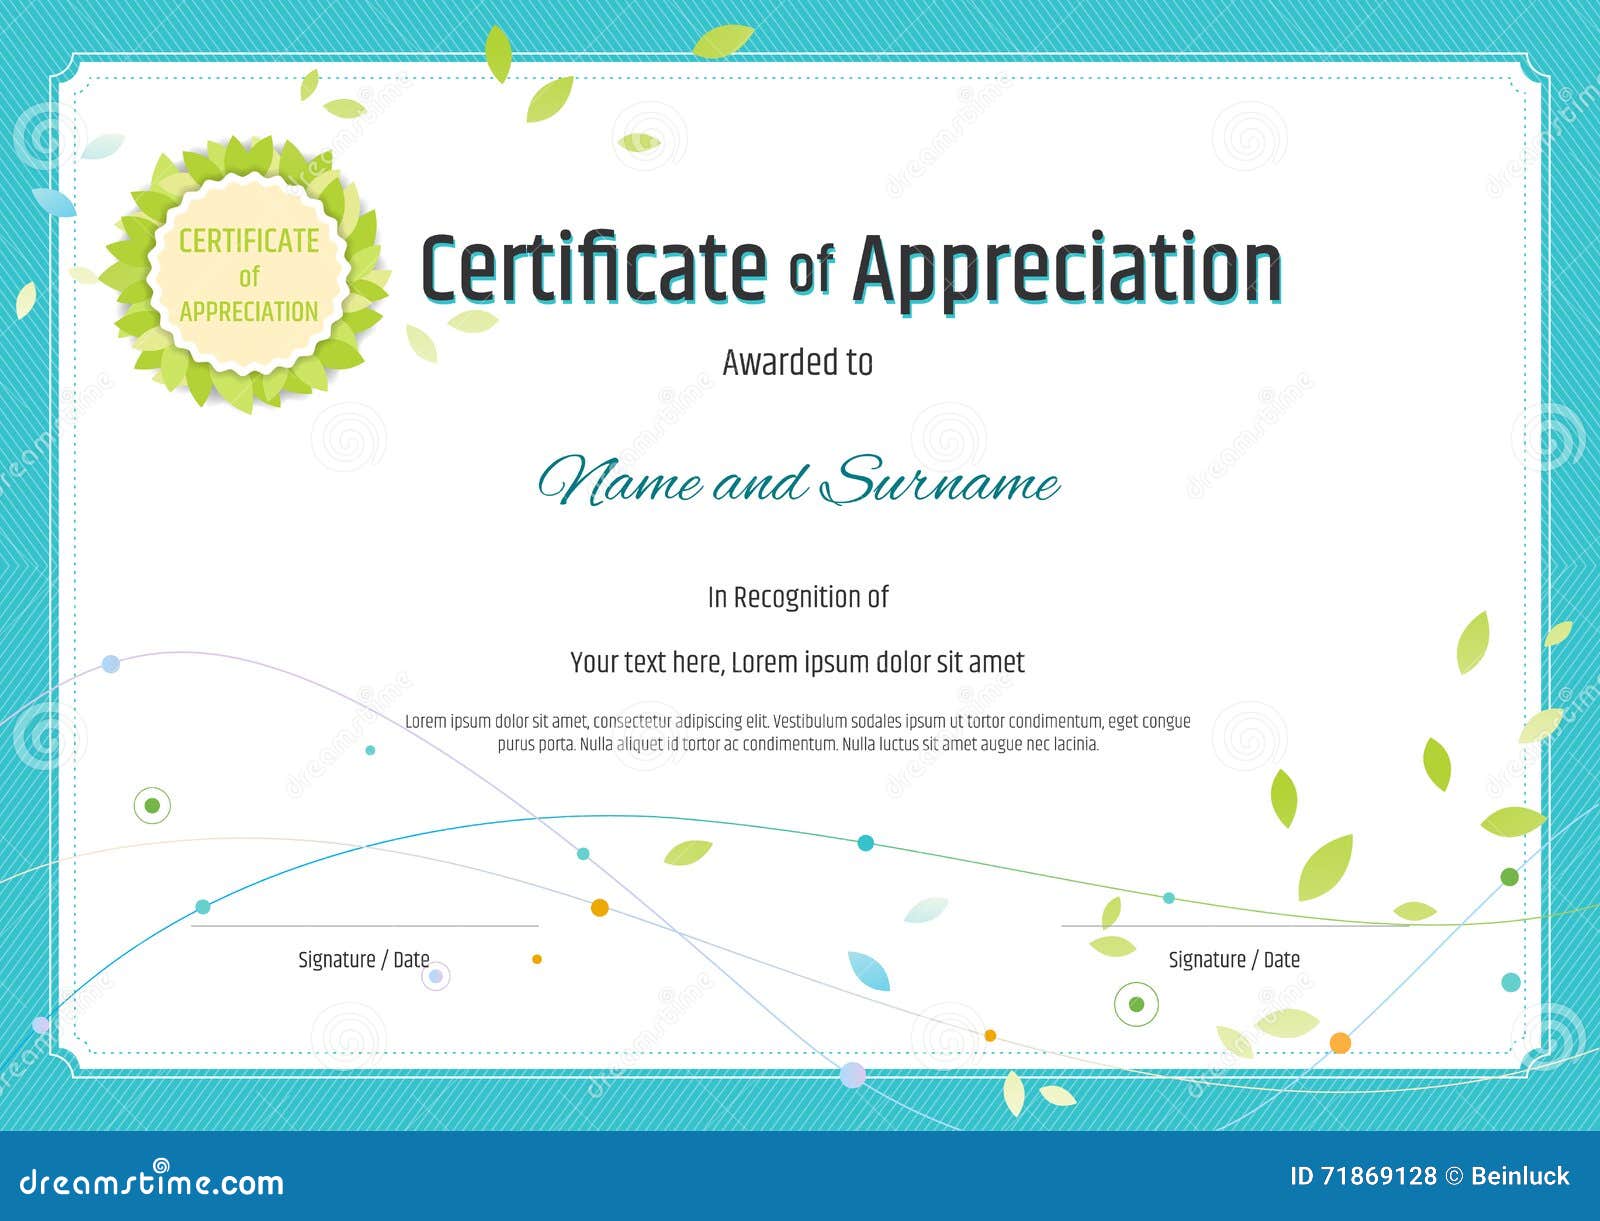 Certificate Of Appreciation Template In Nature Theme With Green With Free Template For Certificate Of Recognition